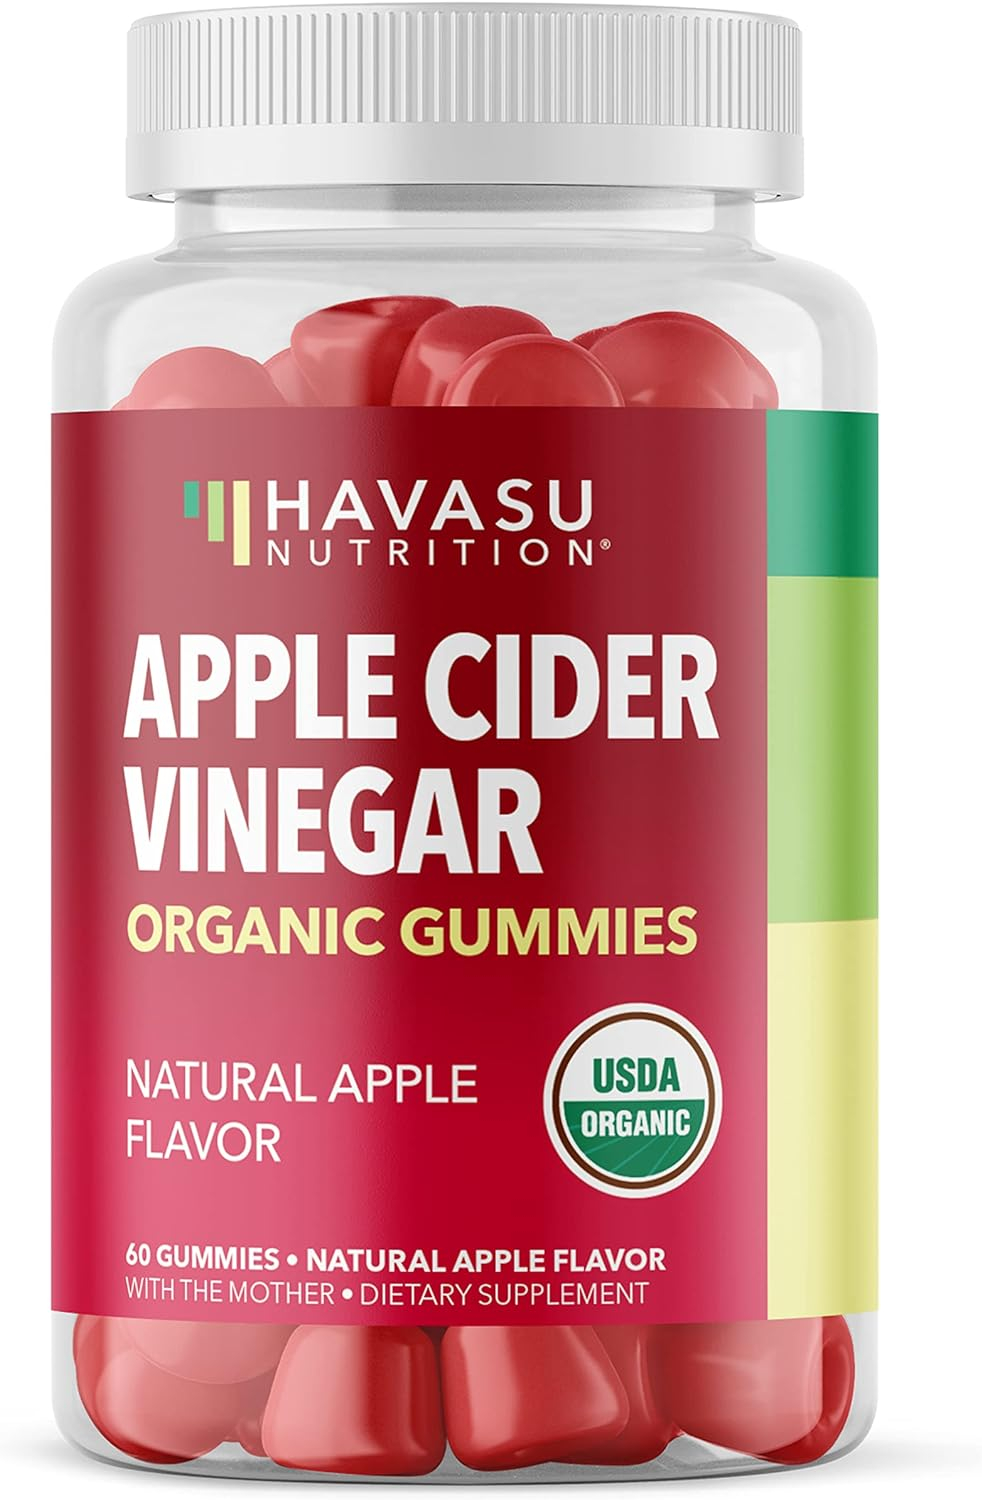 Organic Apple Cider Vinegar Gummies Detox | The Mother Enzyme | ACV Gummy Supplement for Metabolism to Help Support Digestion and Cleanse Gut | 60 Vegan and Non-GMO, Naturally-Flavored Apple Gummies